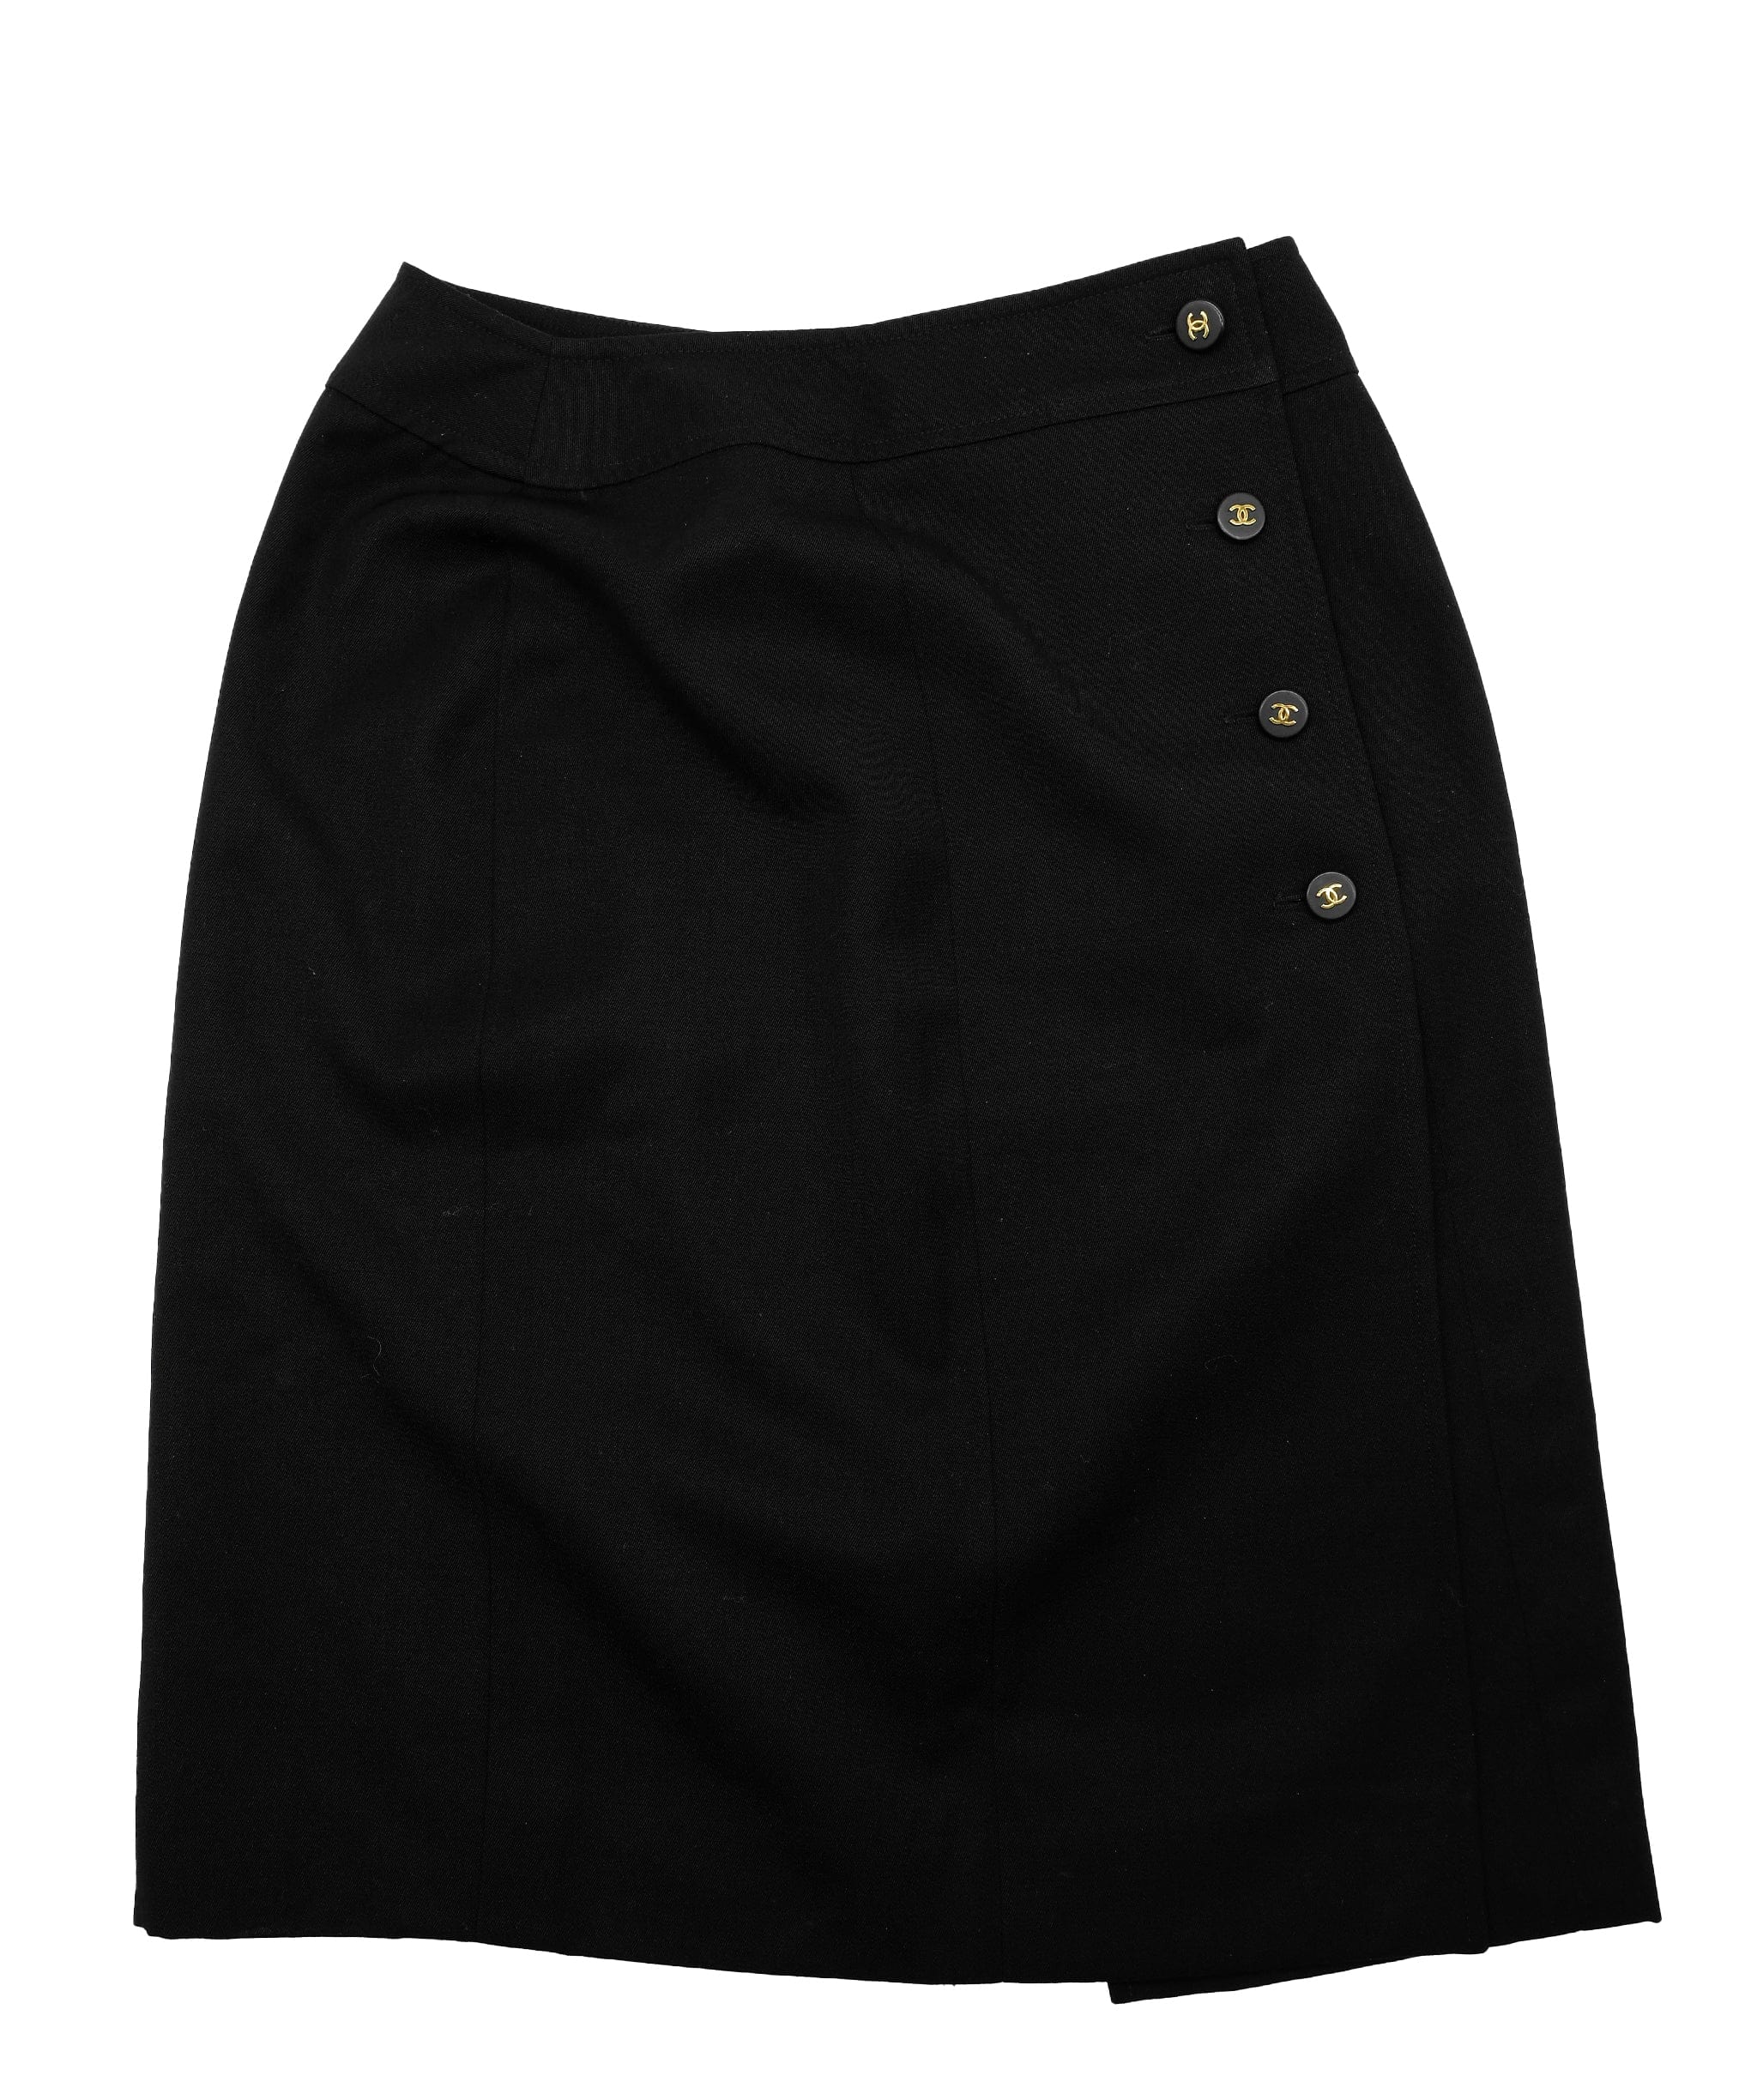 Chanel Chanel 97P CC Buttons Skirt Black #42 ASL7467